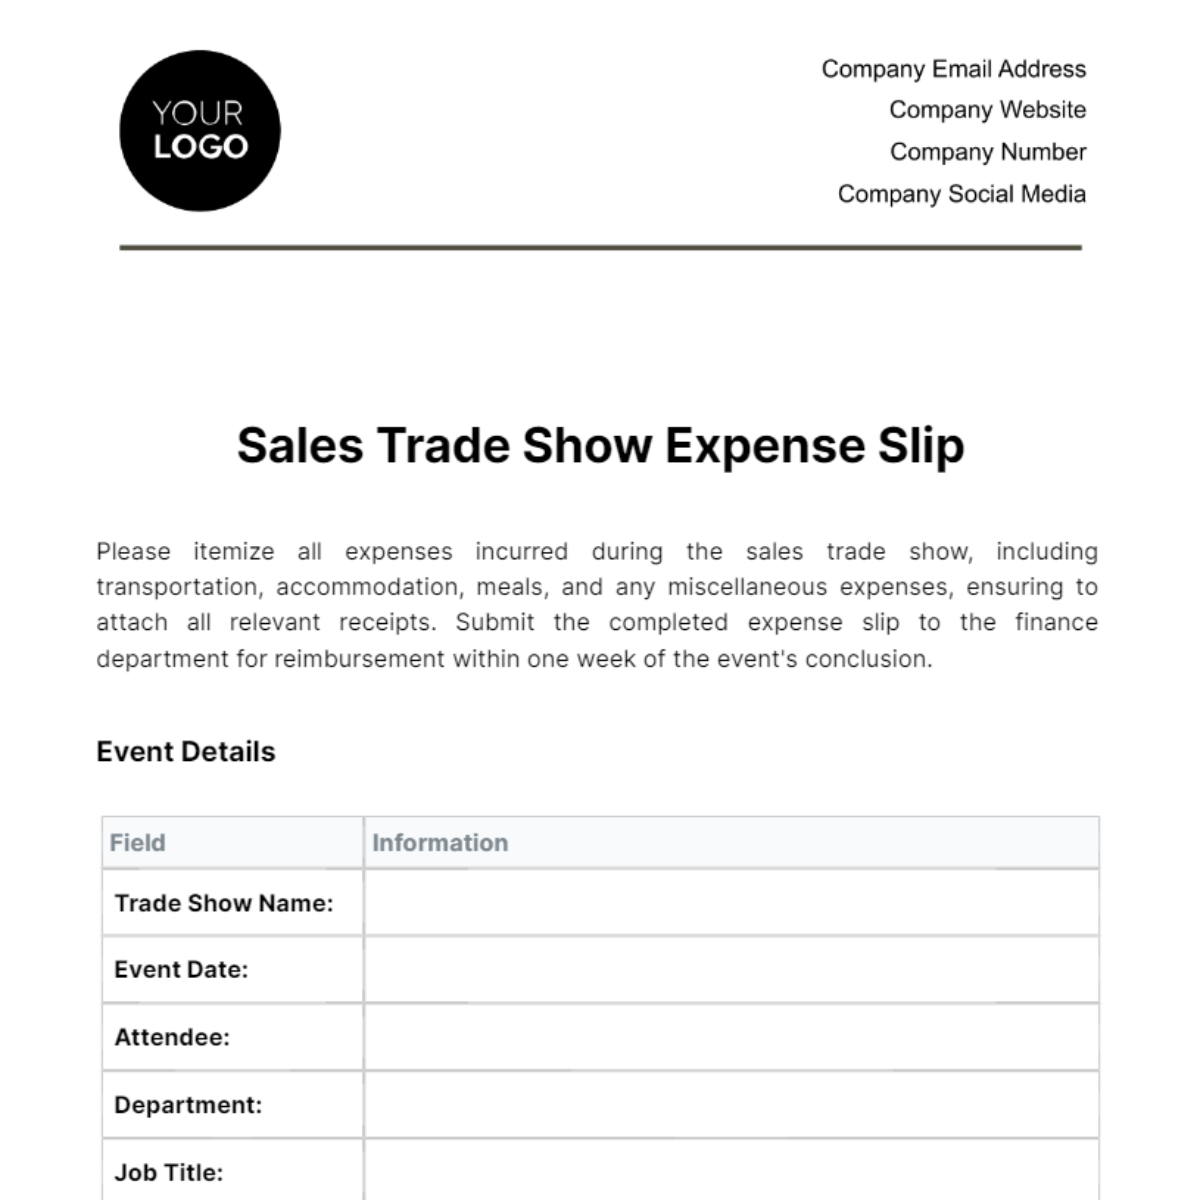 Free Sales Trade Show Expense Slip Template